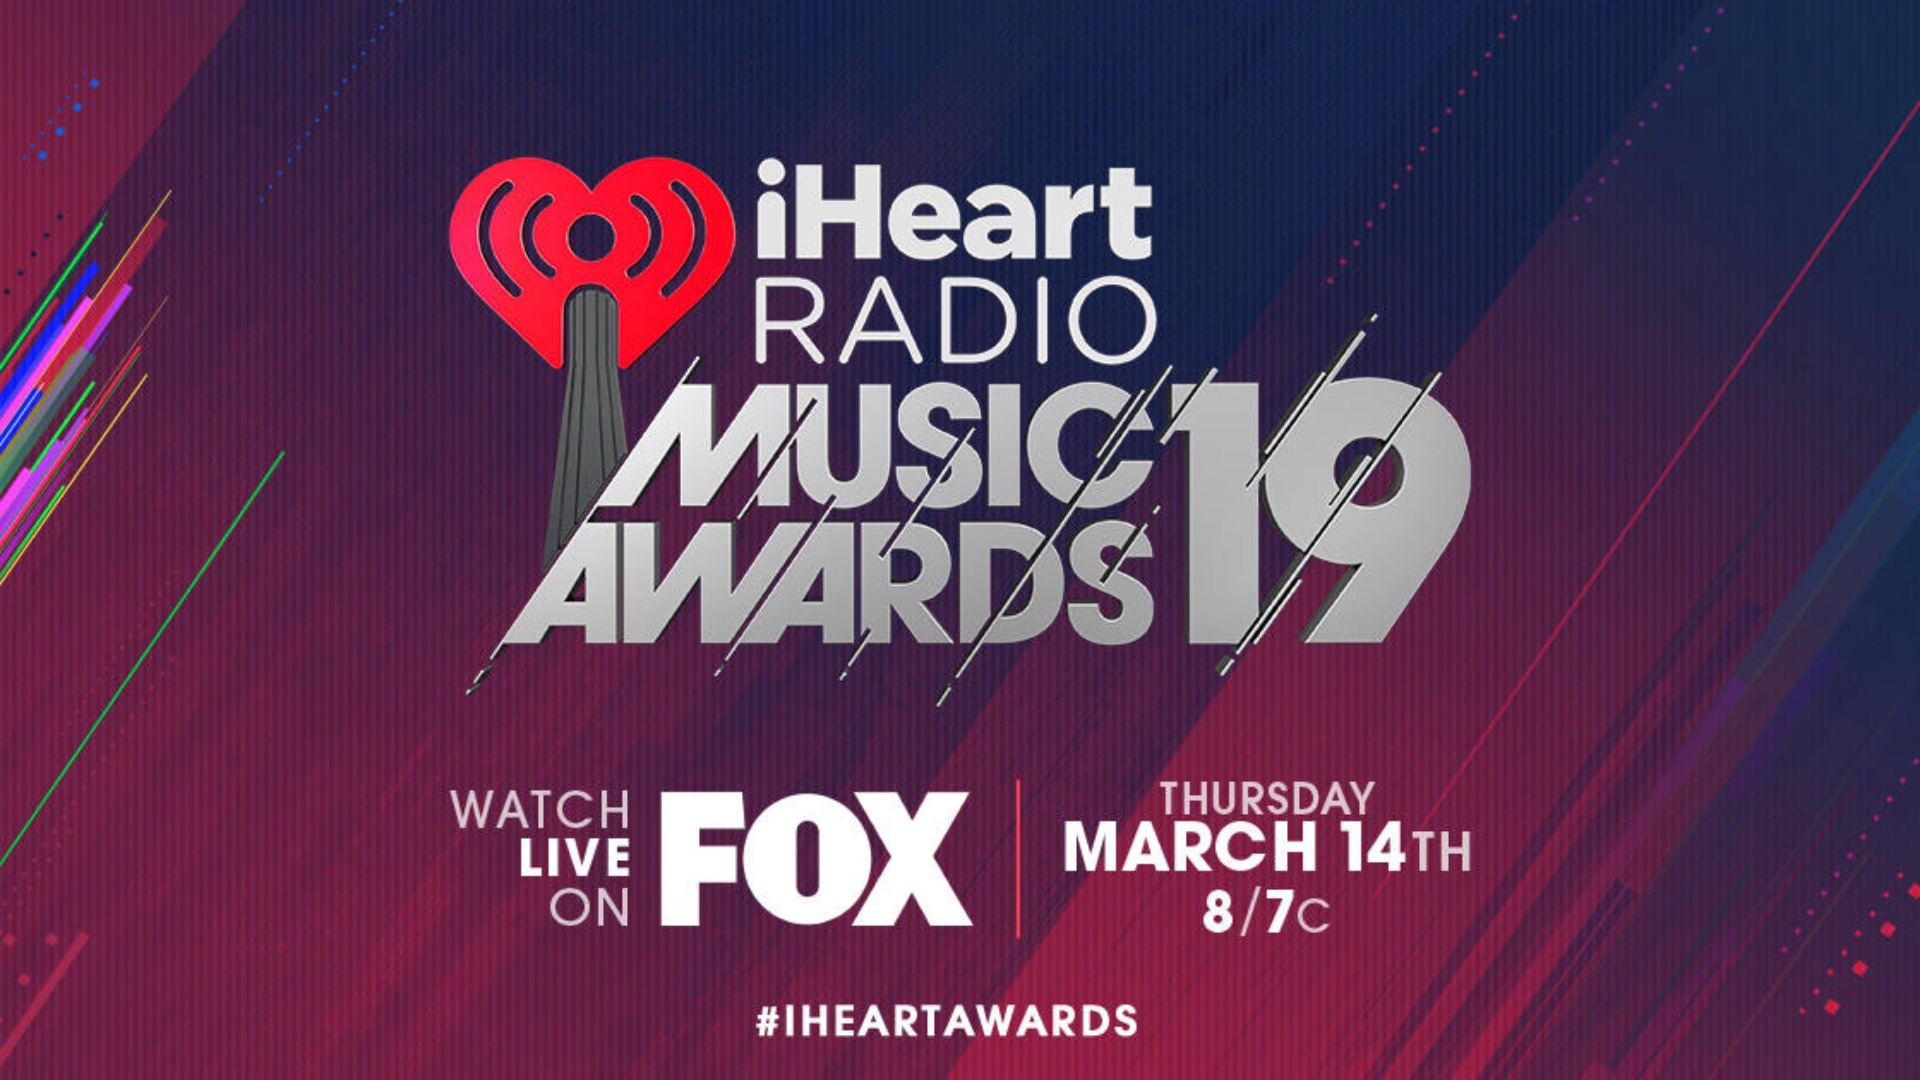 The iHeartRadio Music Awards is a music awards show that celebrates music heard throughout the year across iHeartMedia radio stations nationwide and on iHeartRadio, iHeartMedia's digital music platform.[2] Founded by iHeartRadio in 2014, the event recognizes the most popular artists and music over the past year. Winners are chosen per cumulative performance data, while the public is able to vote in several categories.[3] The inaugural event was held on May 1, 2014 at the Shrine Auditorium in Los Angeles. Its first two years were broadcast live on NBC, from 2016 to 2018 it was simulcast on TBS, TNT and truTV.[4][5][6] The sixth annual iHeartRadio Music Awards will be held on March 14, 2019 at the Microsoft Theater, Los Angeles and broadcast live on Fox. The trophy is manufactured by the New York firm Society Awards.Wikiepedia